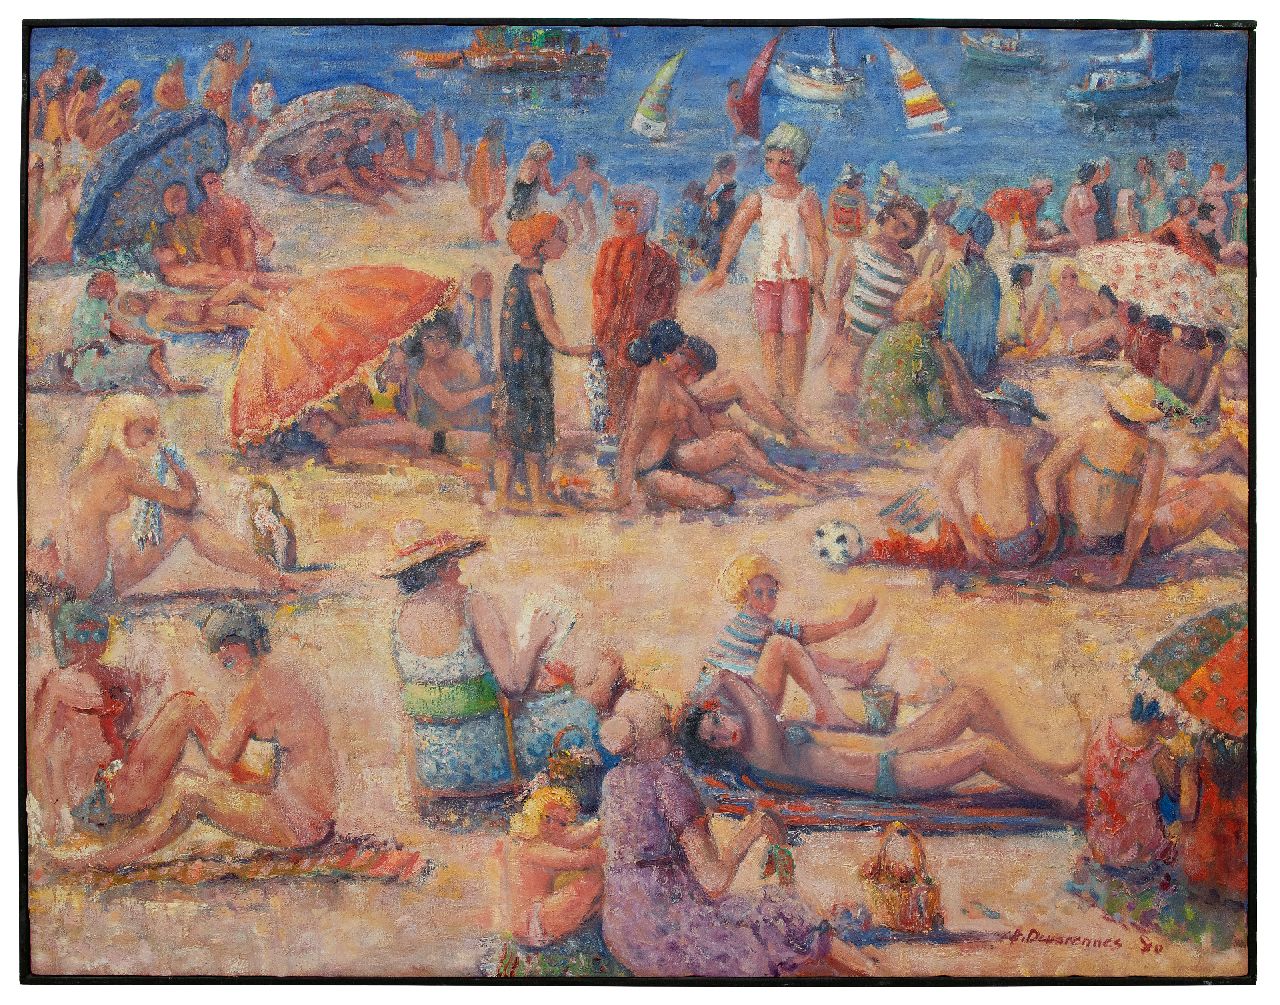 Devarennes C.  | Charly Devarennes | Paintings offered for sale | On the beach, Collioure, oil on canvas 105.0 x 134.1 cm, signed l.r. and dated '80